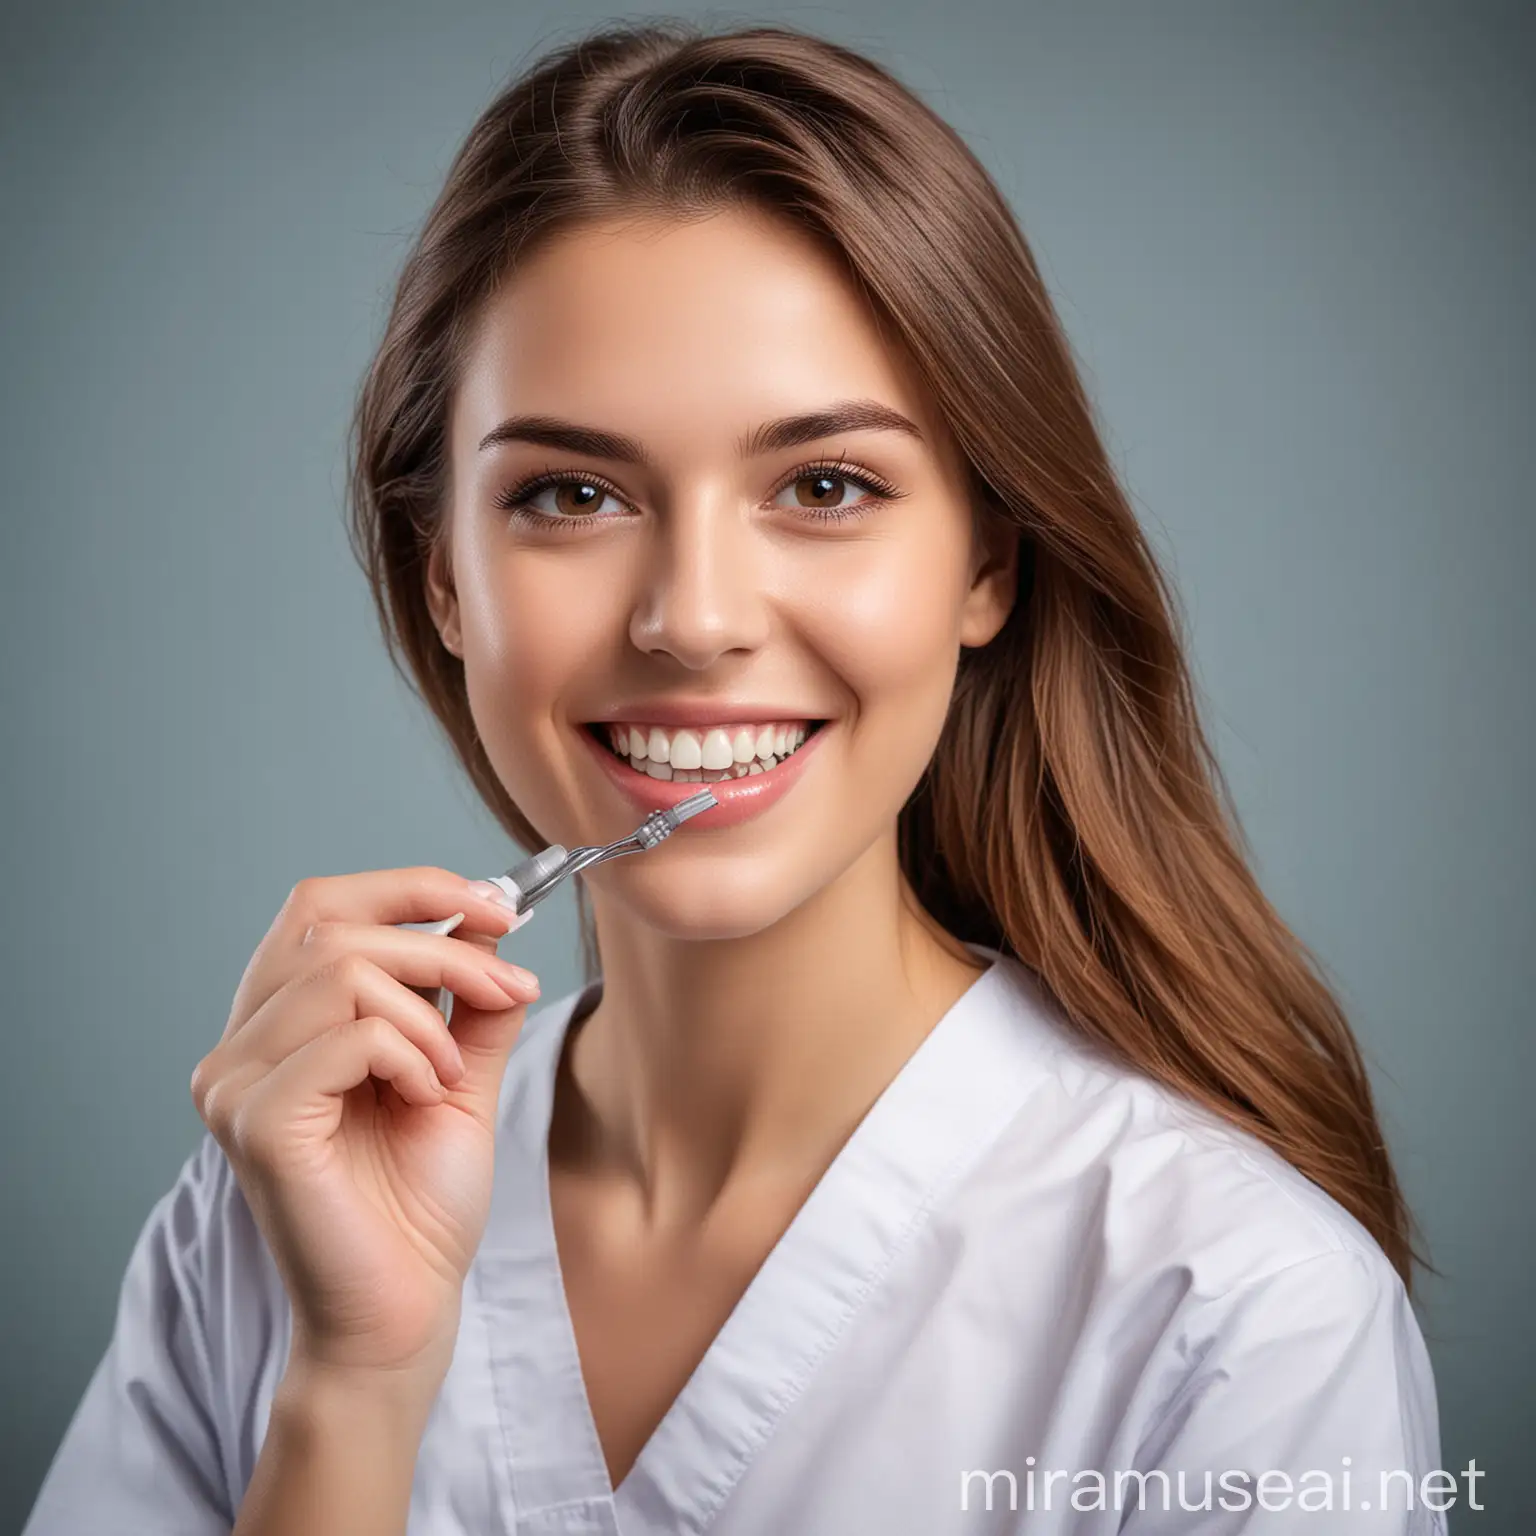 Young Woman Modeling for Dental Clinic Photoshoot